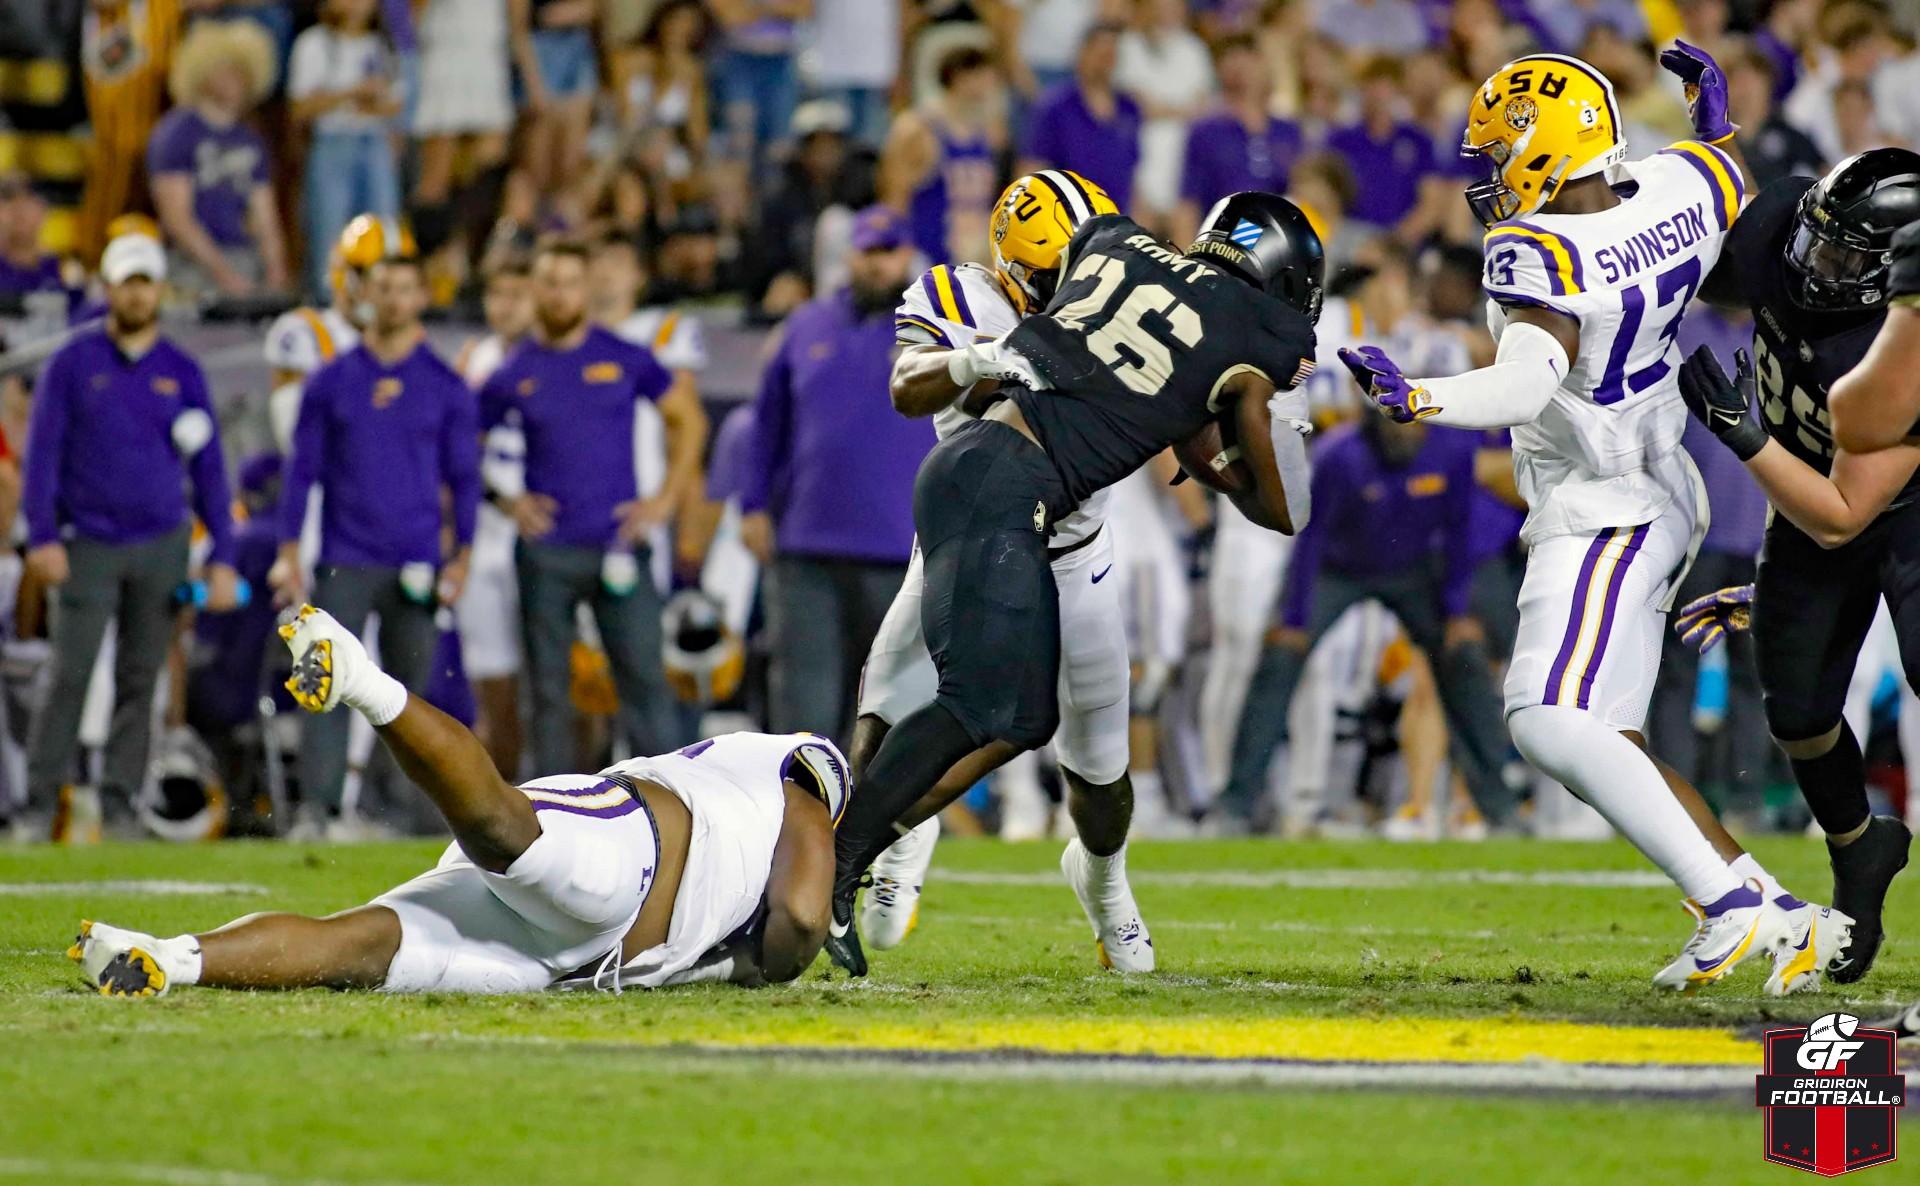 The “Next Man Up” Mentality is More Critical Than Ever For LSU’s Defense Heading Into Alabama